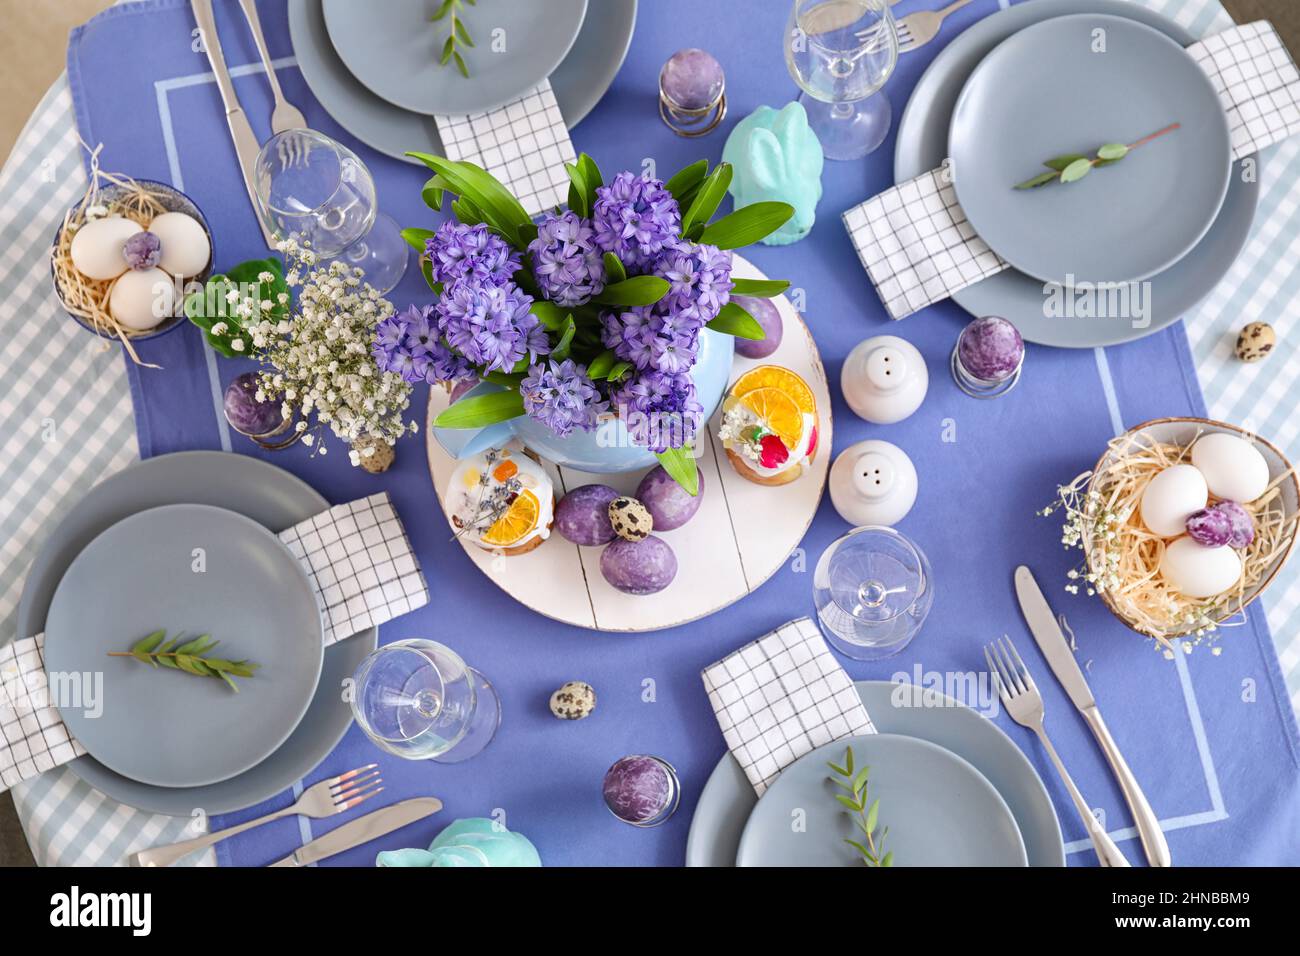 Vase with beautiful flowers, Easter cakes and eggs on served table Stock Photo